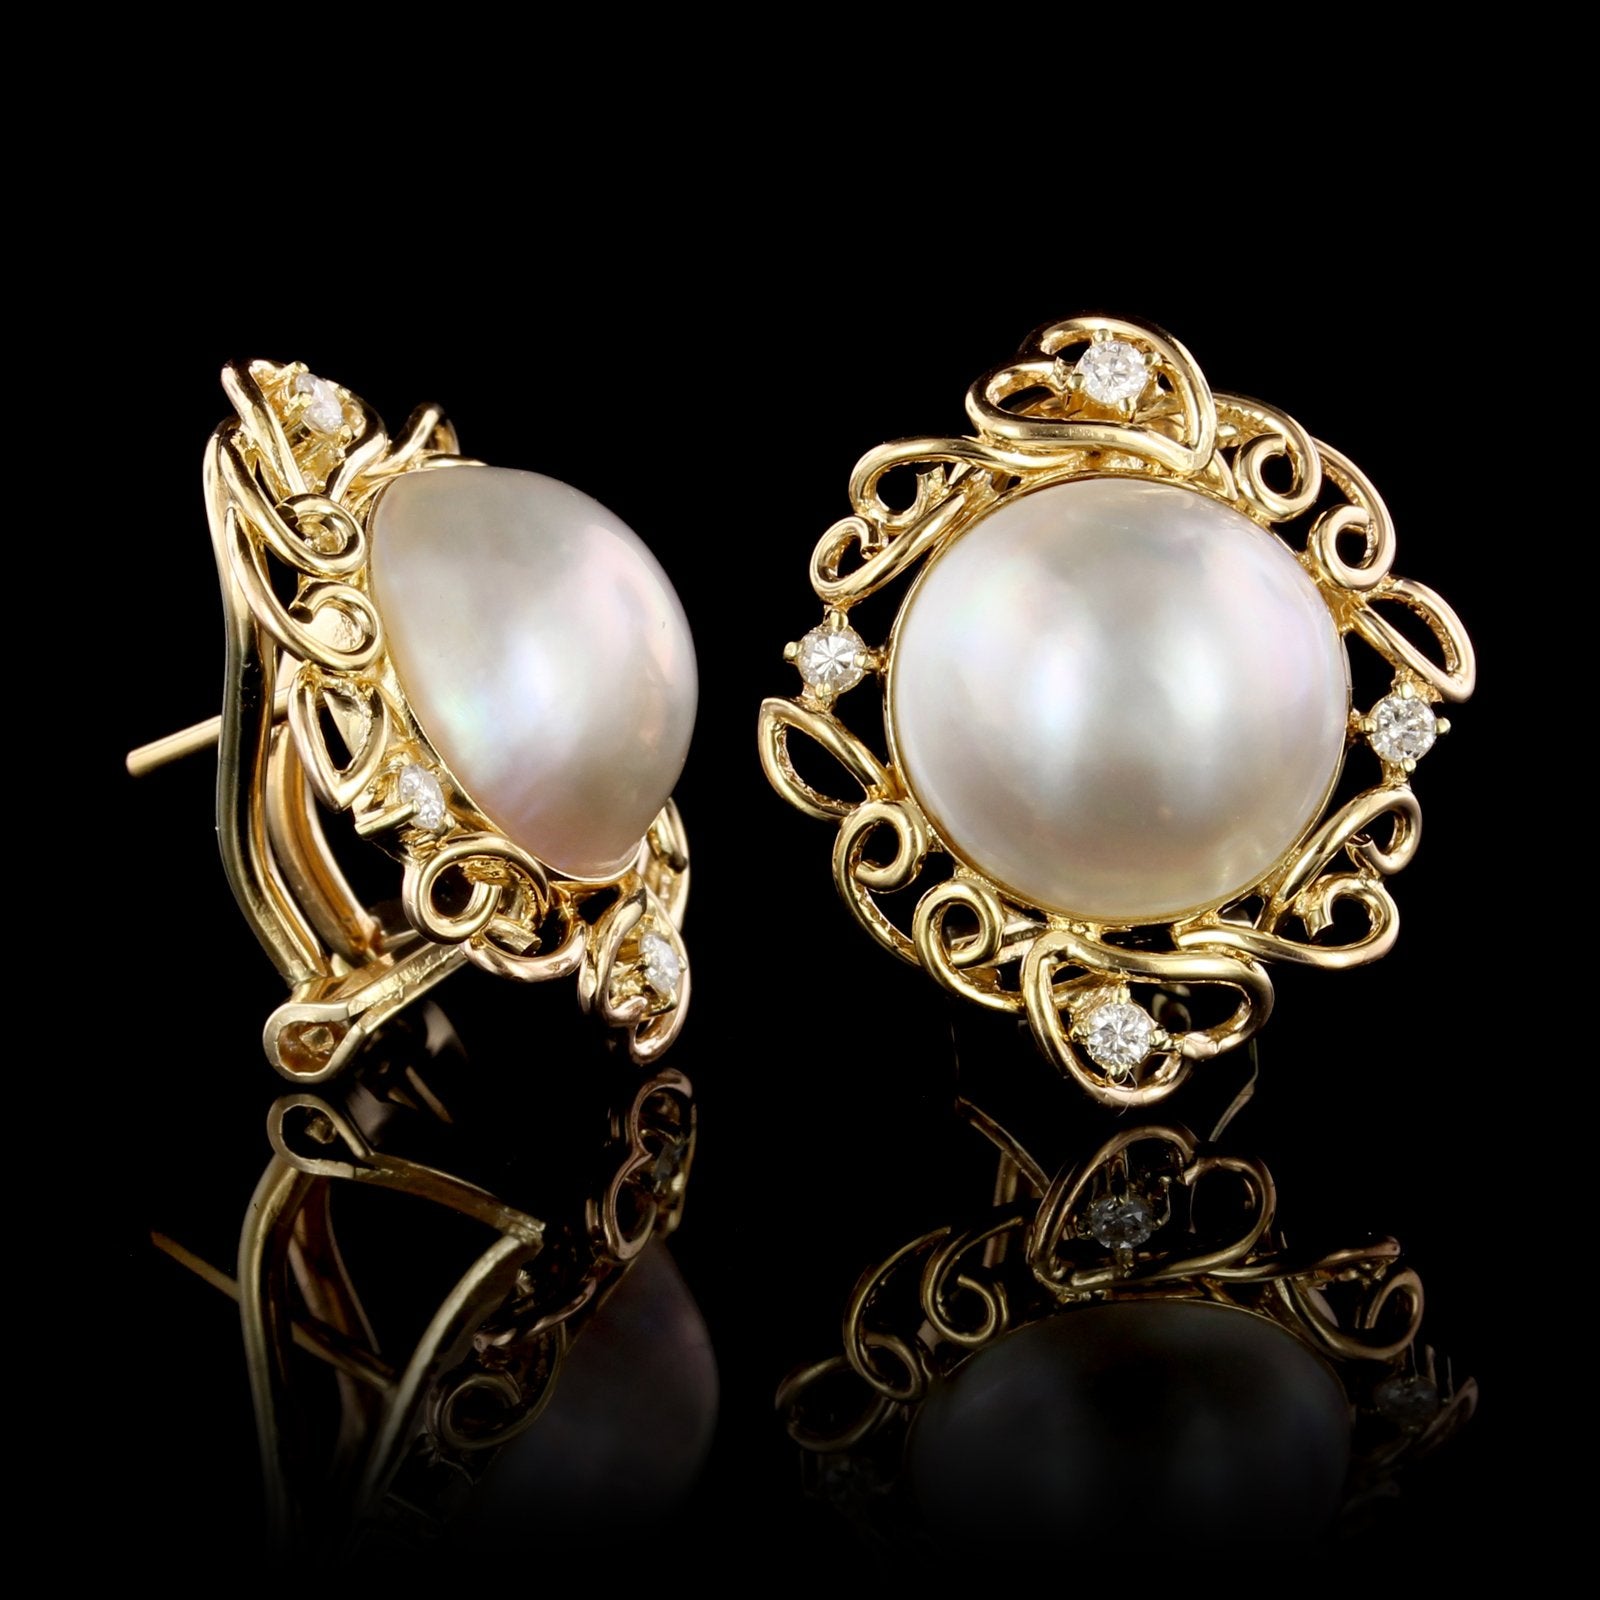 14K Yellow Gold Cultured Mabe Pearl and Diamond Earrings